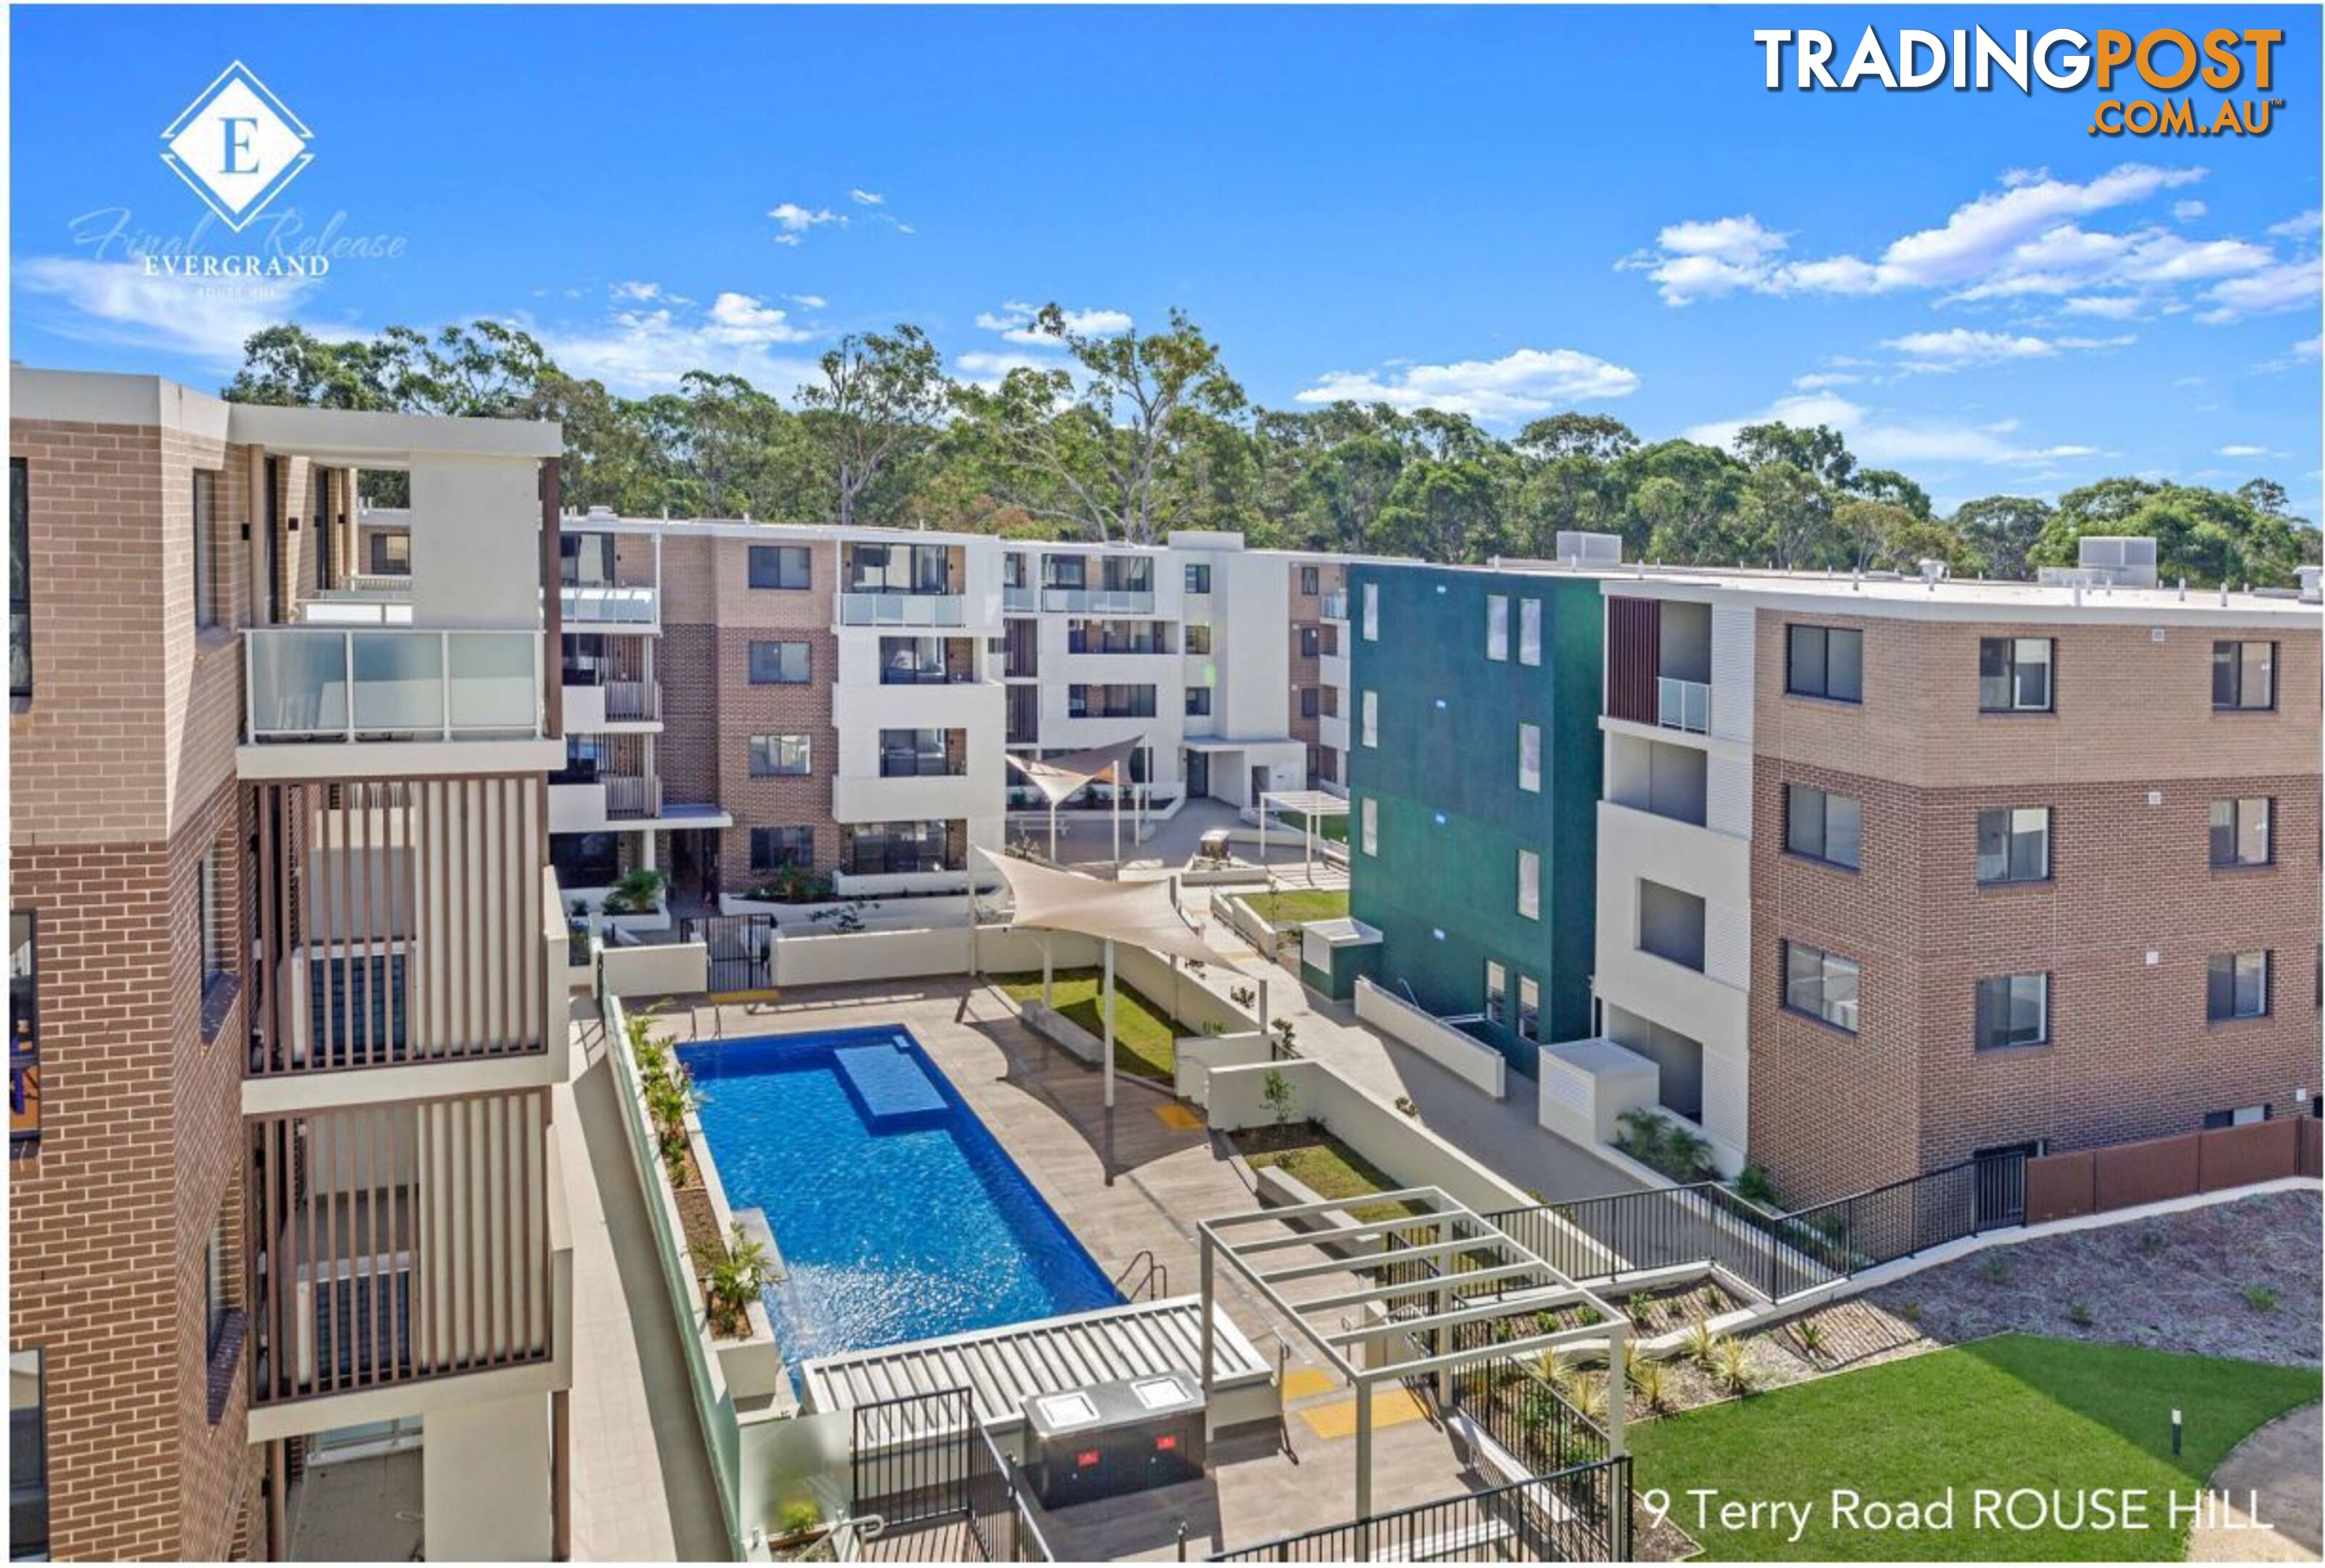 Evergrand 161/9 Terry Road Rouse Hill NSW 2155